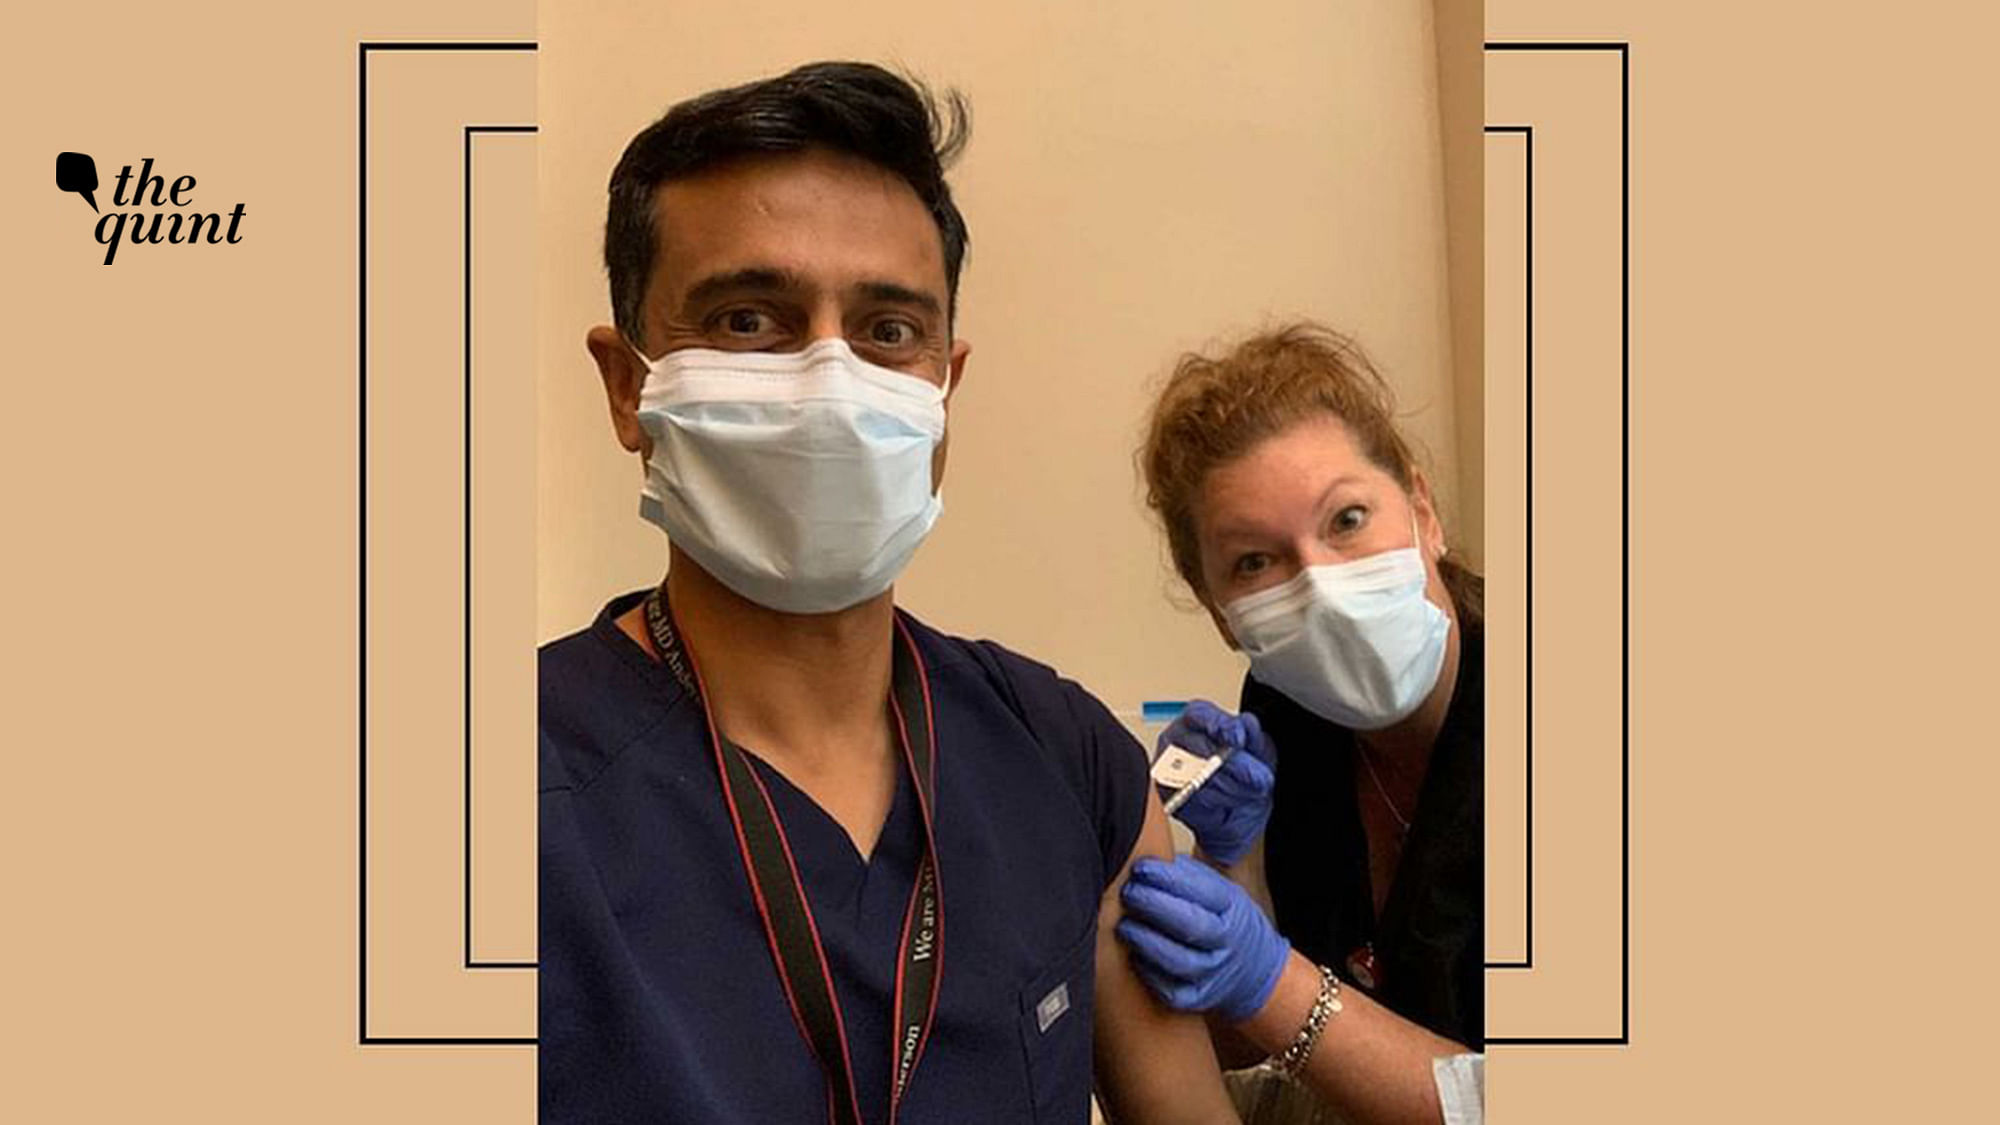 Dr Shubham Pant getting vaccinated at his medical institute in the US.